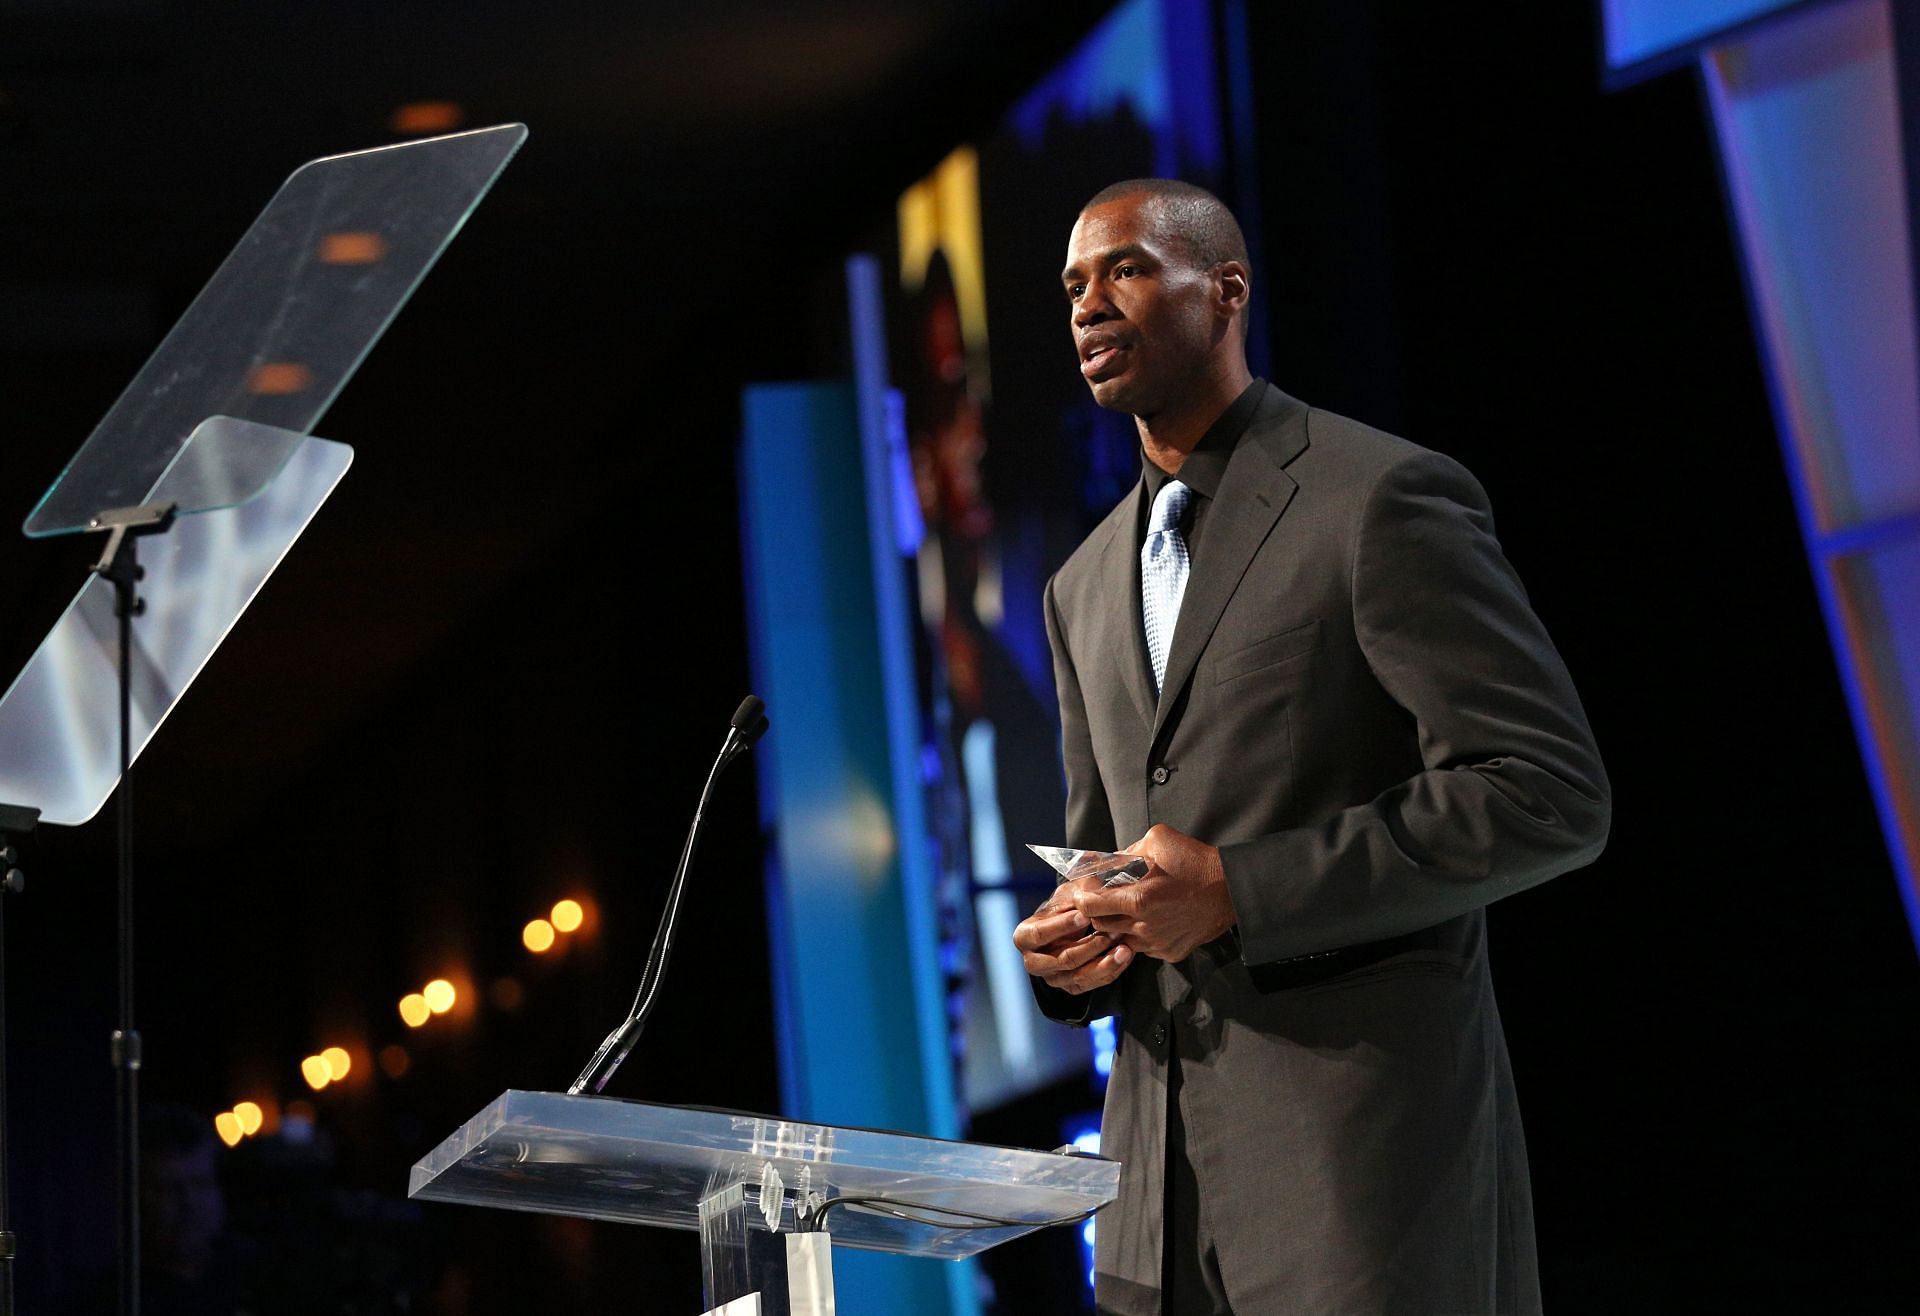 Jason Collins came out as gay in February 2014 (Image via Getty Images)